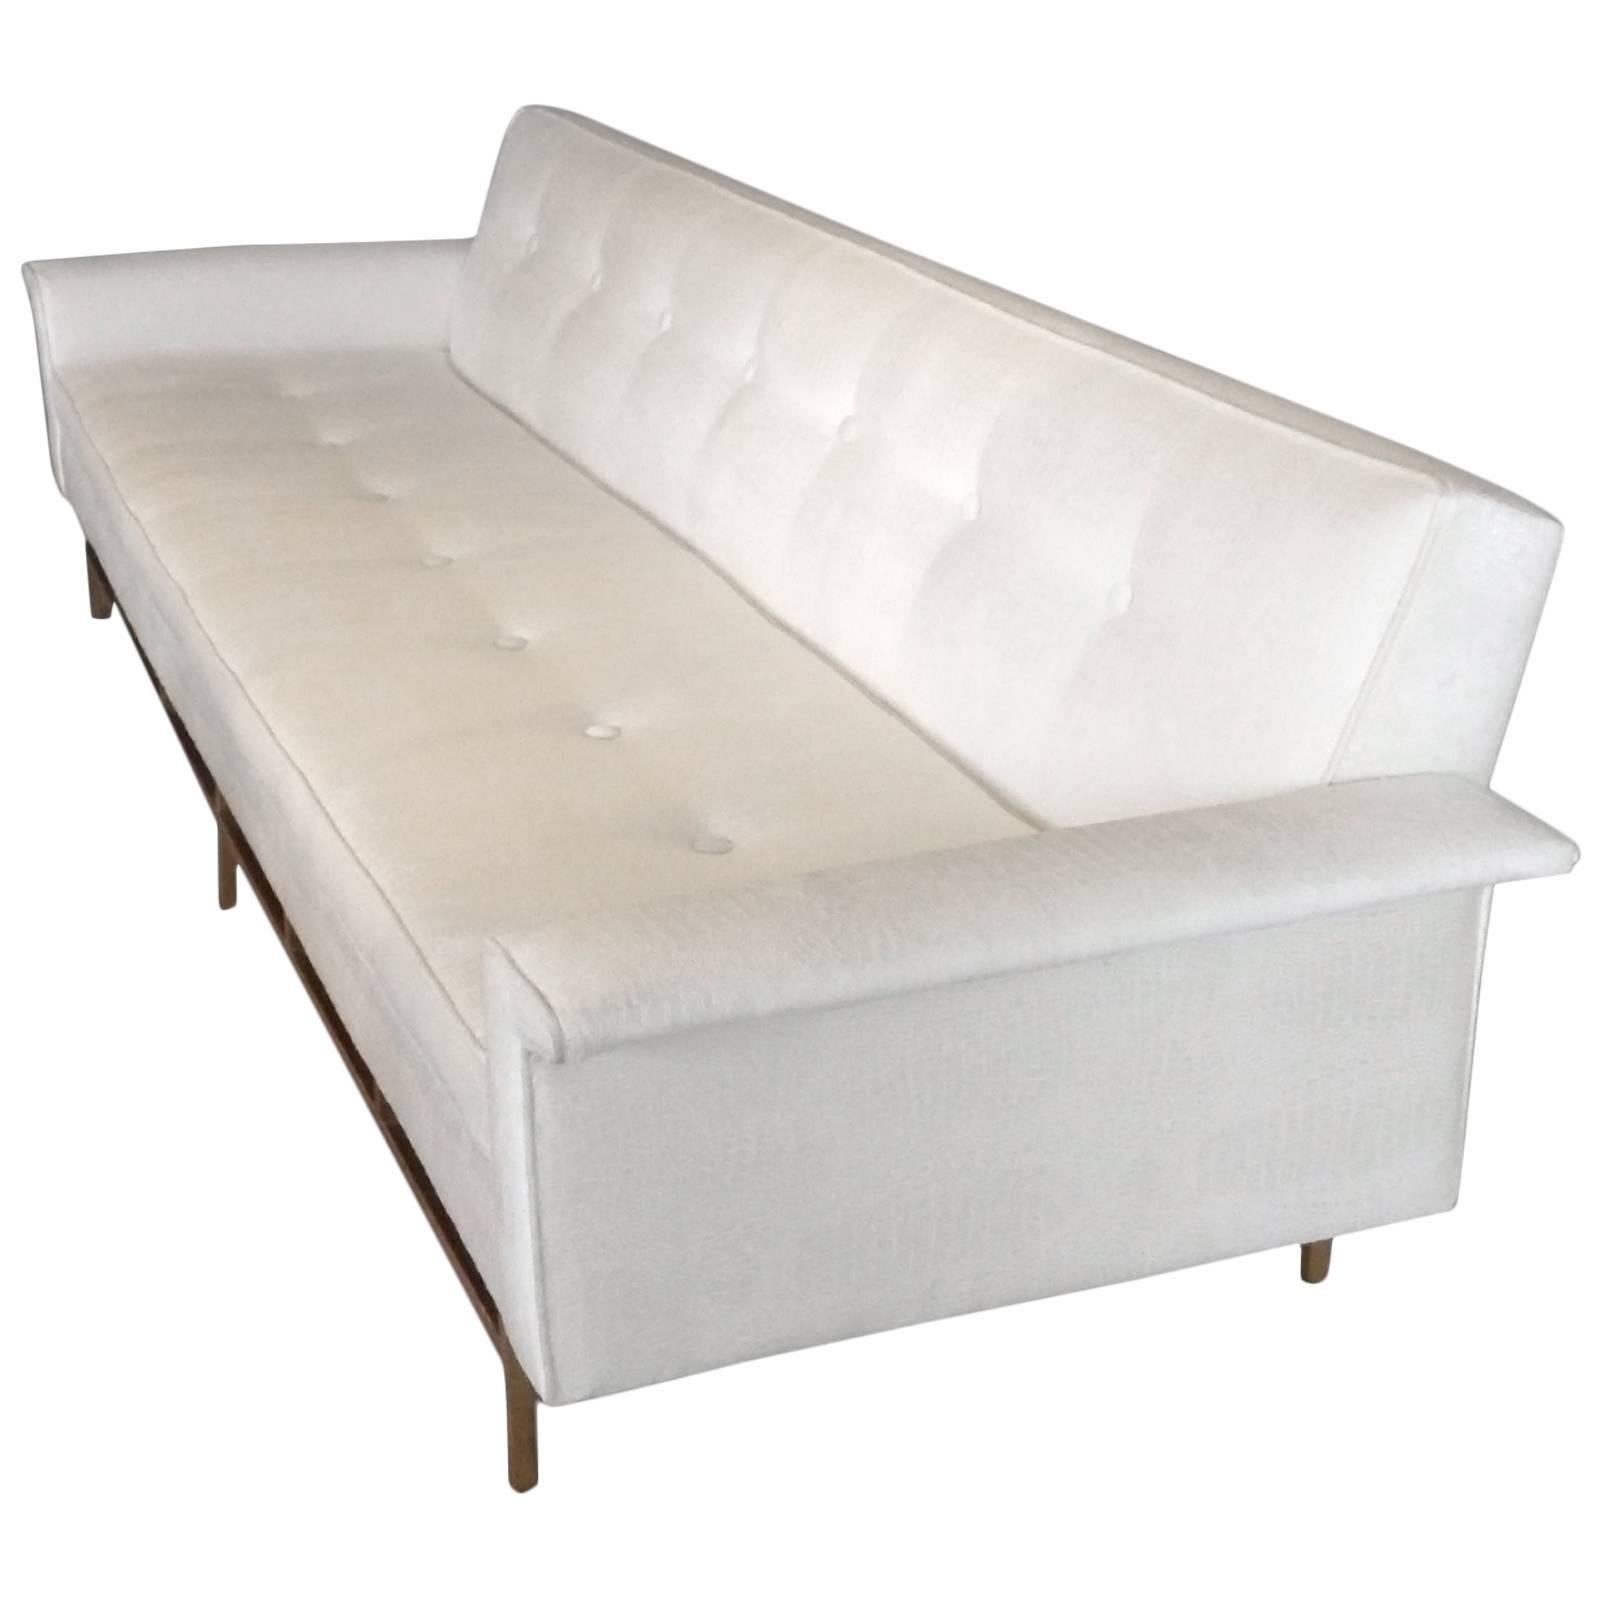 Ben Seibel for Stand Built  Dunbar style white sofa on architectural brass base For Sale